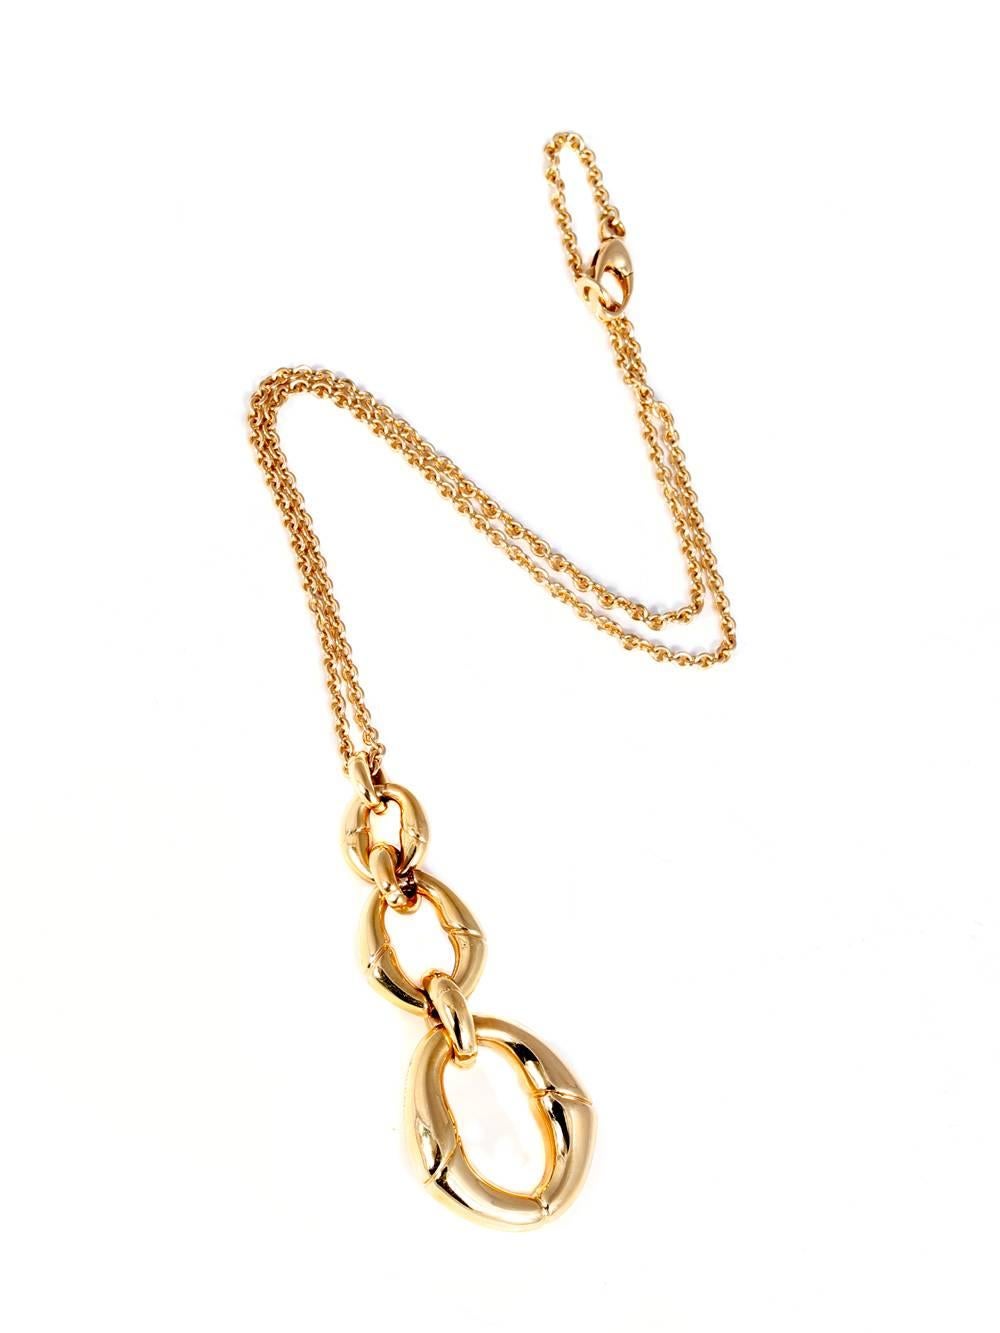 Paying homage to nature, this fabulous Bamboo collection by Gucci is crafted in 18k yellow gold. 

Necklace Length: 16″
Pendant Length: 2.5″

Inventory ID: 0000361